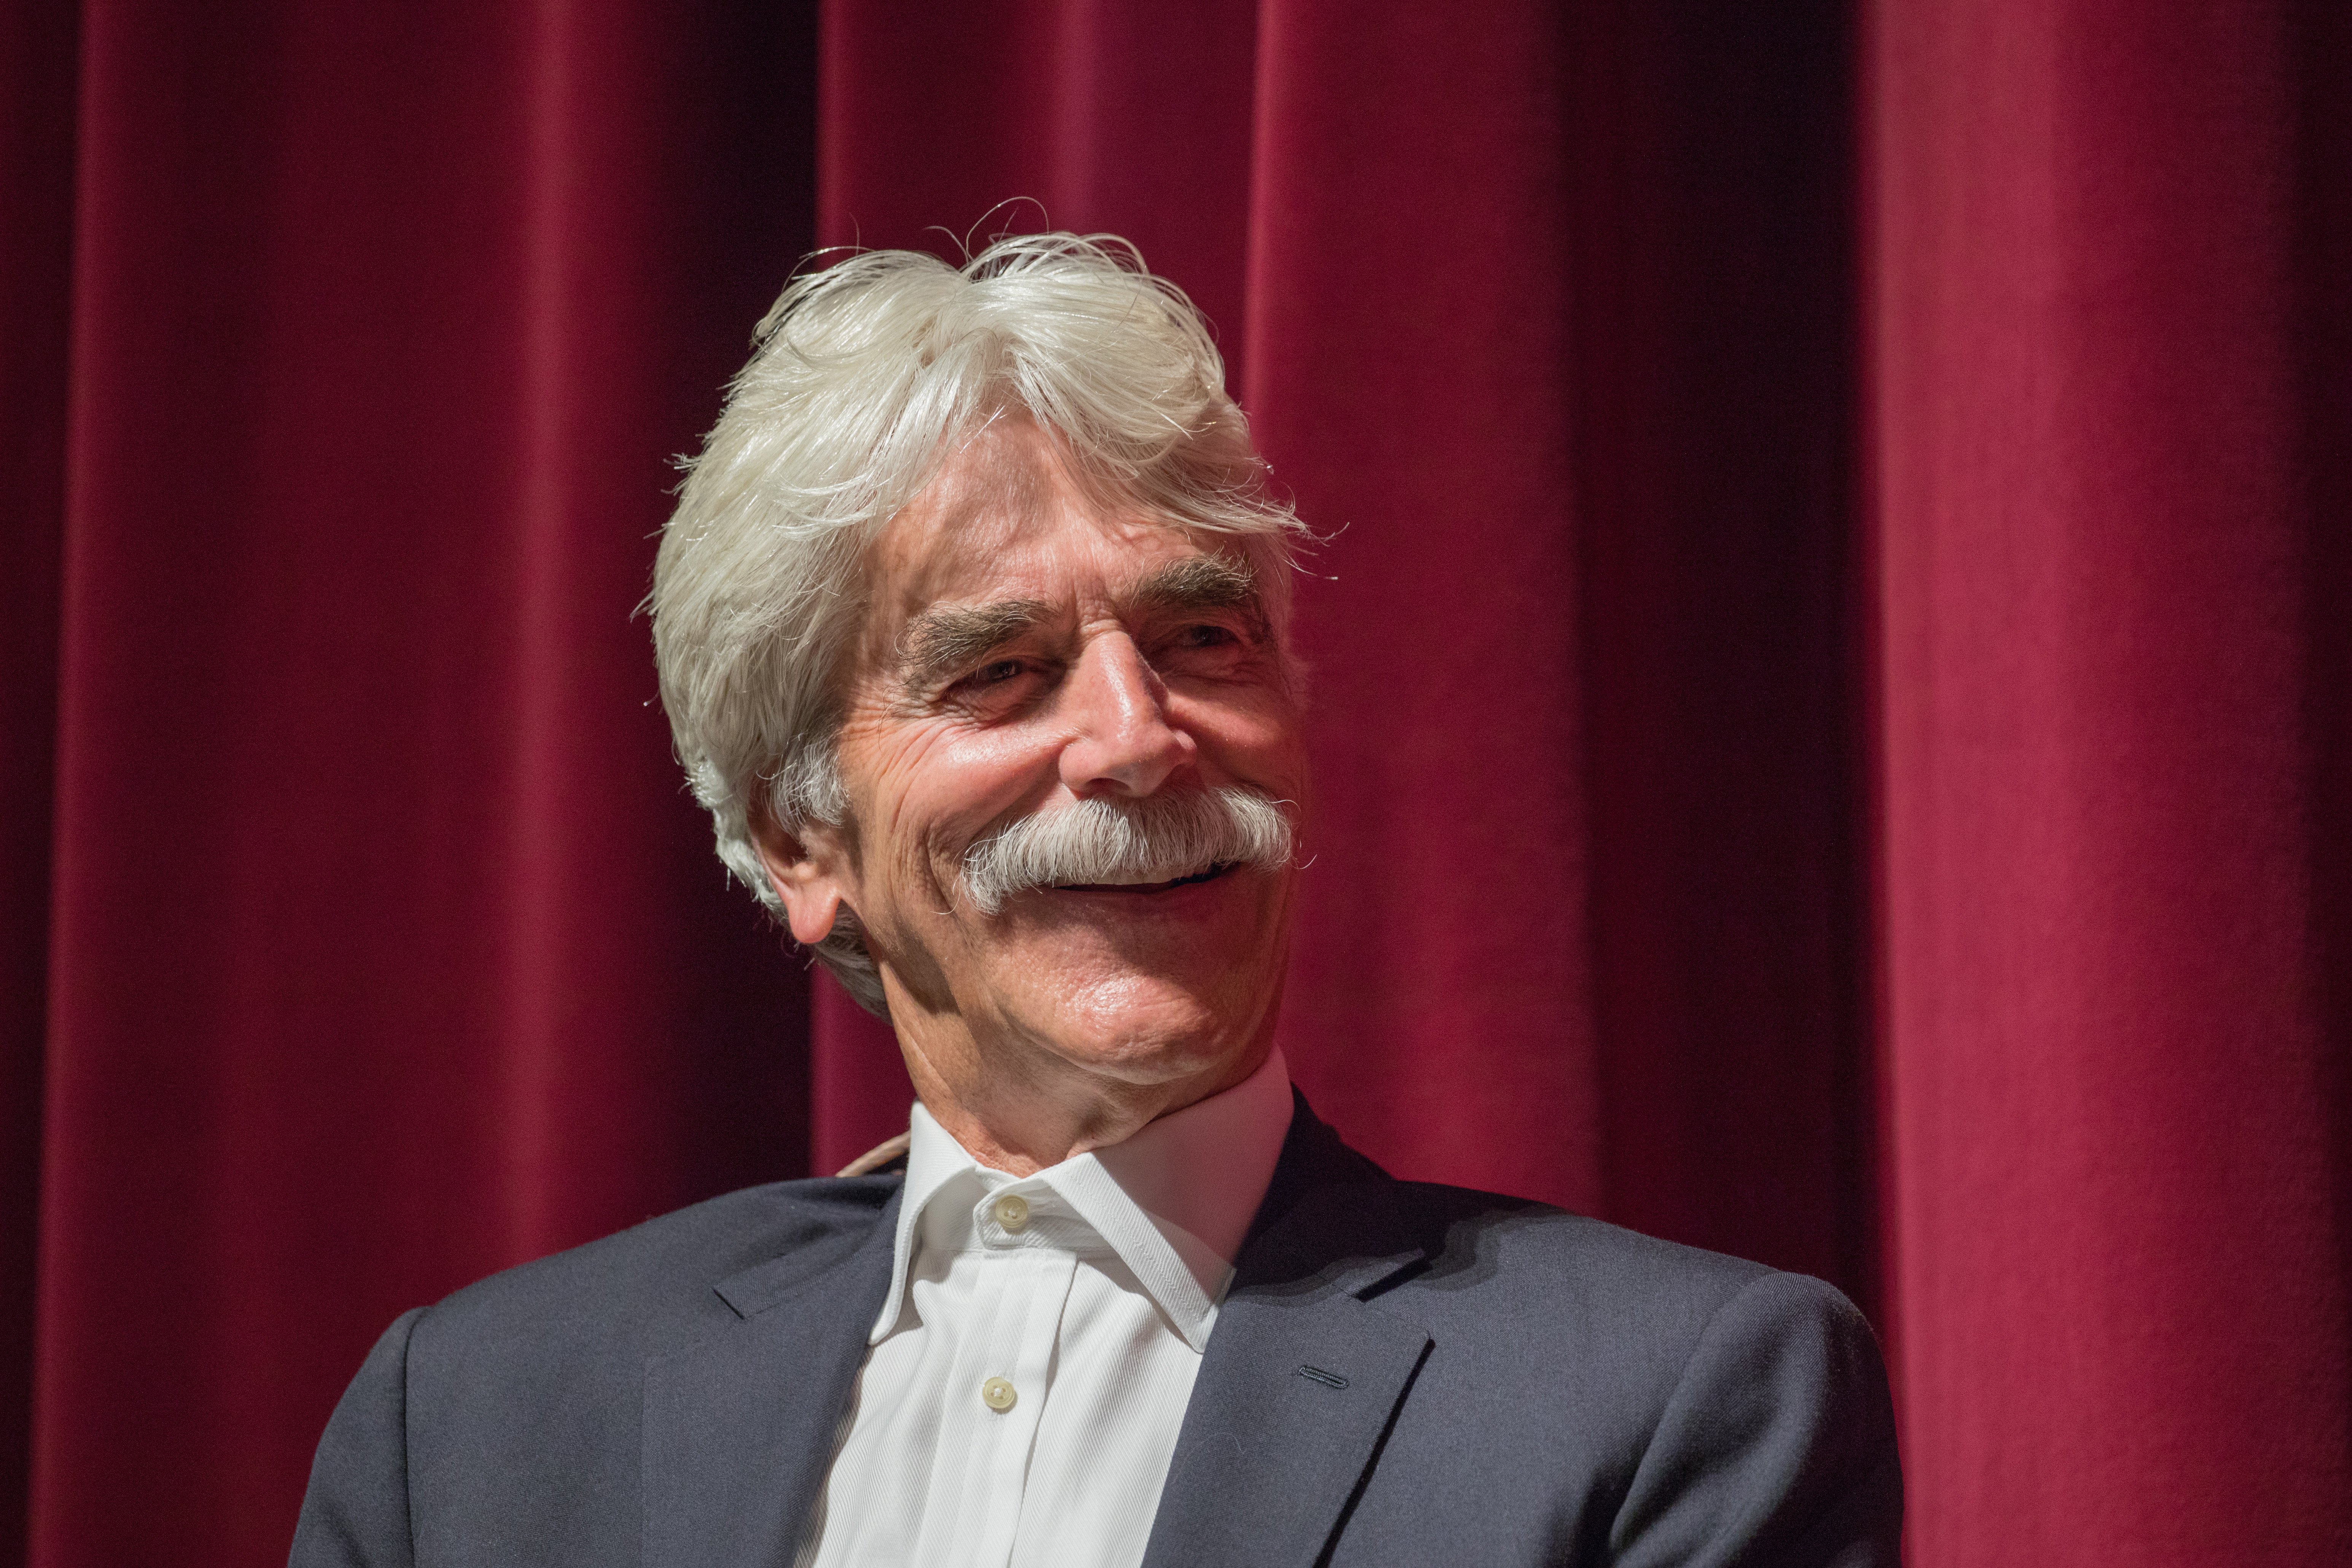 Sam Elliott at the 2019 Plaza Classic Film Festival on August 02, 2019 | Photo: GettyImages